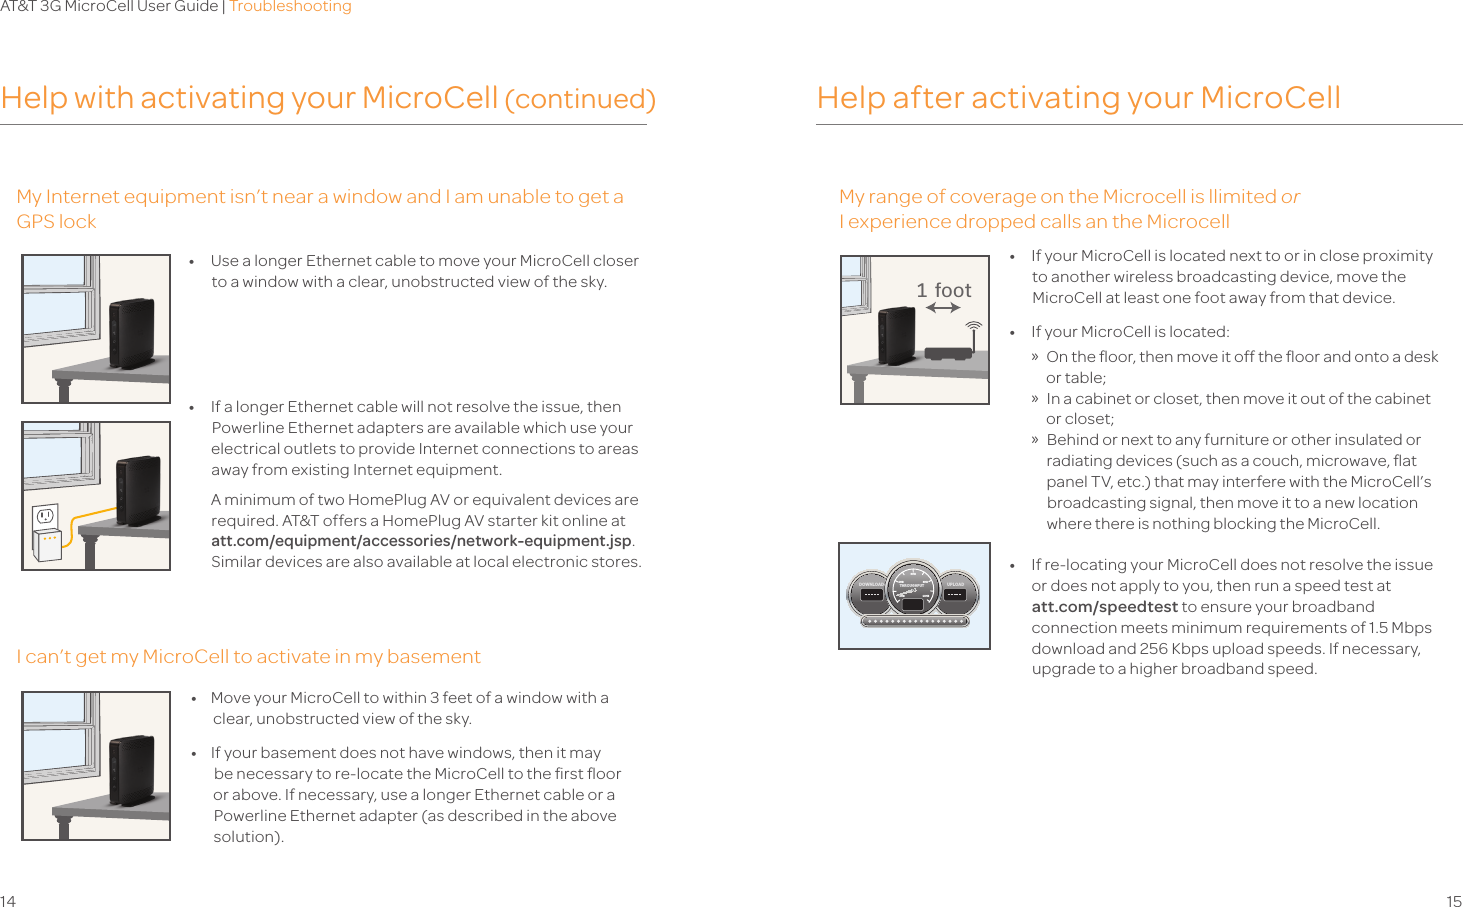 AT&amp;T 3G MicroCell User Guide | Troubleshooting14 15Help with activating your MicroCell (continued) Help after activating your MicroCellMy Internet equipment isn’t near a window and I am unable to get a GPS lockMy range of coverage on the MicroCell is limitedorI experience dropped calls on the MicroCellI can’t get my MicroCell to activate in my basement•   Use a longer Ethernet cable to move your MicroCell closer  to a window with a clear, unobstructed view of the sky.•   If a longer Ethernet cable will not resolve the issue, then Powerline Ethernet adapters are available which use your electrical outlets to provide Internet connections to areas away from existing Internet equipment.   A minimum of two HomePlug AV or equivalent devices are required. AT&amp;T offers a HomePlug AV starter kit online at att.com/equipment/accessories/network-equipment.jsp. Similar devices are also available at local electronic stores. •   If your MicroCell is located next to or in close proximity to another wireless broadcasting device, move the MicroCell at least one foot away from that device.•   If your MicroCell is located: » On the ﬂoor, then move it off the ﬂoor and onto a desk or table; » In a cabinet or closet, then move it out of the cabinet or closet; »Behind or next to any furniture or other insulated or radiating devices (such as a couch, microwave, ﬂat panel TV, etc.) that may interfere with the MicroCell’s broadcasting signal, then move it to a new location where there is nothing blocking the MicroCell. •   If re-locating your MicroCell does not resolve the issue or does not apply to you, then run a speed test at  att.com/speedtest to ensure your broadband connection meets minimum requirements of 1.5 Mbps download and 256 Kbps upload speeds. If necessary, upgrade to a higher broadband speed.  1 foot•  Move your MicroCell to within 3 feet of a window with a clear, unobstructed view of the sky.  •    If your basement does not have windows, then it may be necessary to re-locate the MicroCell to the ﬁrst ﬂoor or above. If necessary, use a longer Ethernet cable or a Powerline Ethernet adapter (as described in the above solution).UPLOADDOWNLOADTHROUGHPUT6MB4MB 8MB2MB 10MBMy range of coverage on the Microcell is llimited orI experience dropped calls an the Microcell